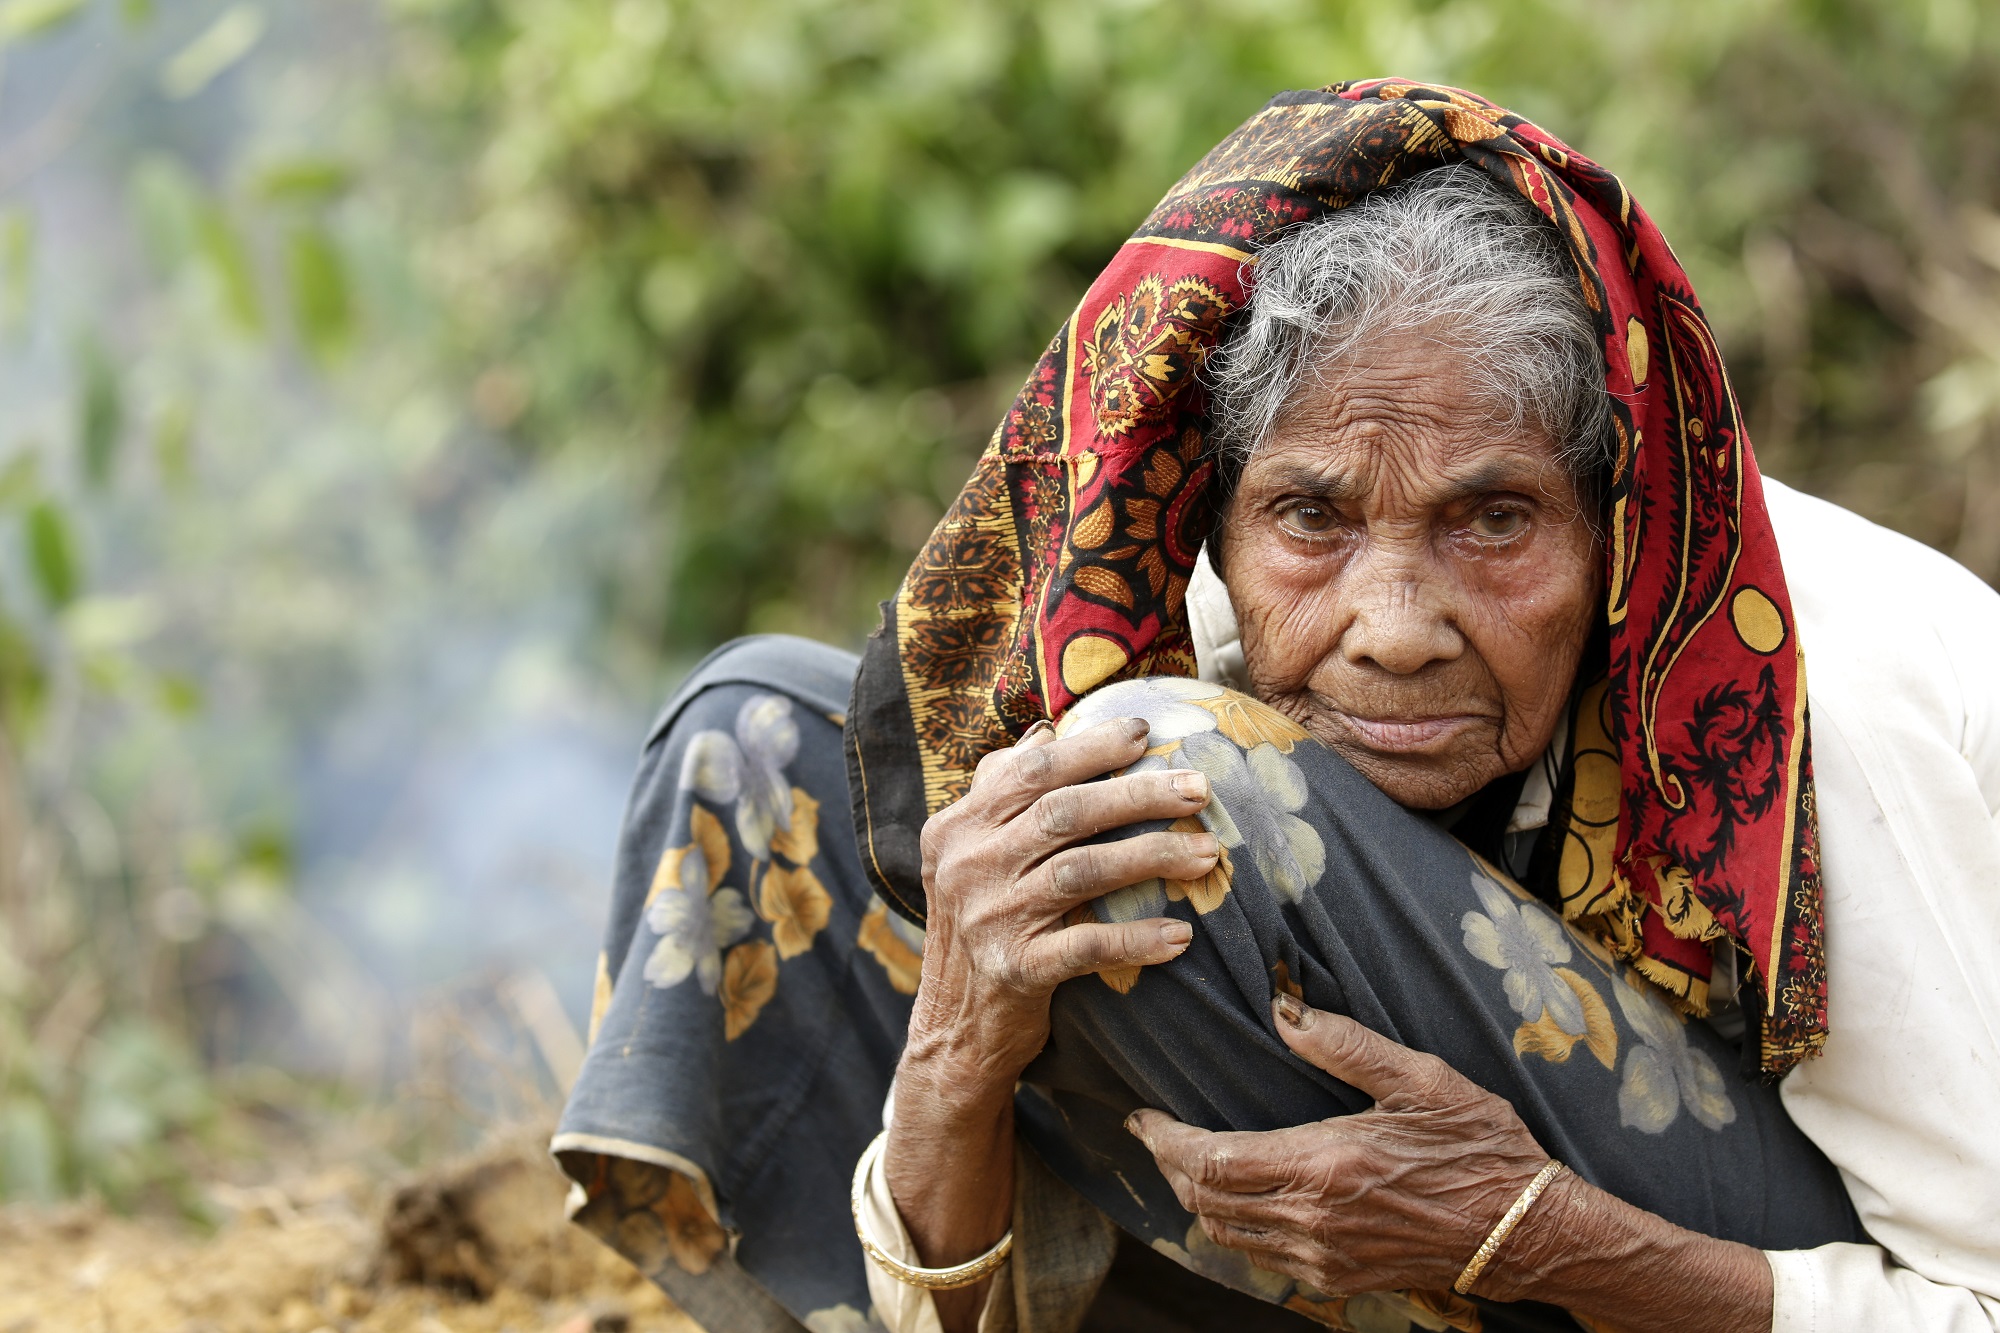  _806_https://www.helpage.org/silo/images/kulle--older-woman-from-myanmar-who-fled-to-bangladesh_2000x1333.jpg